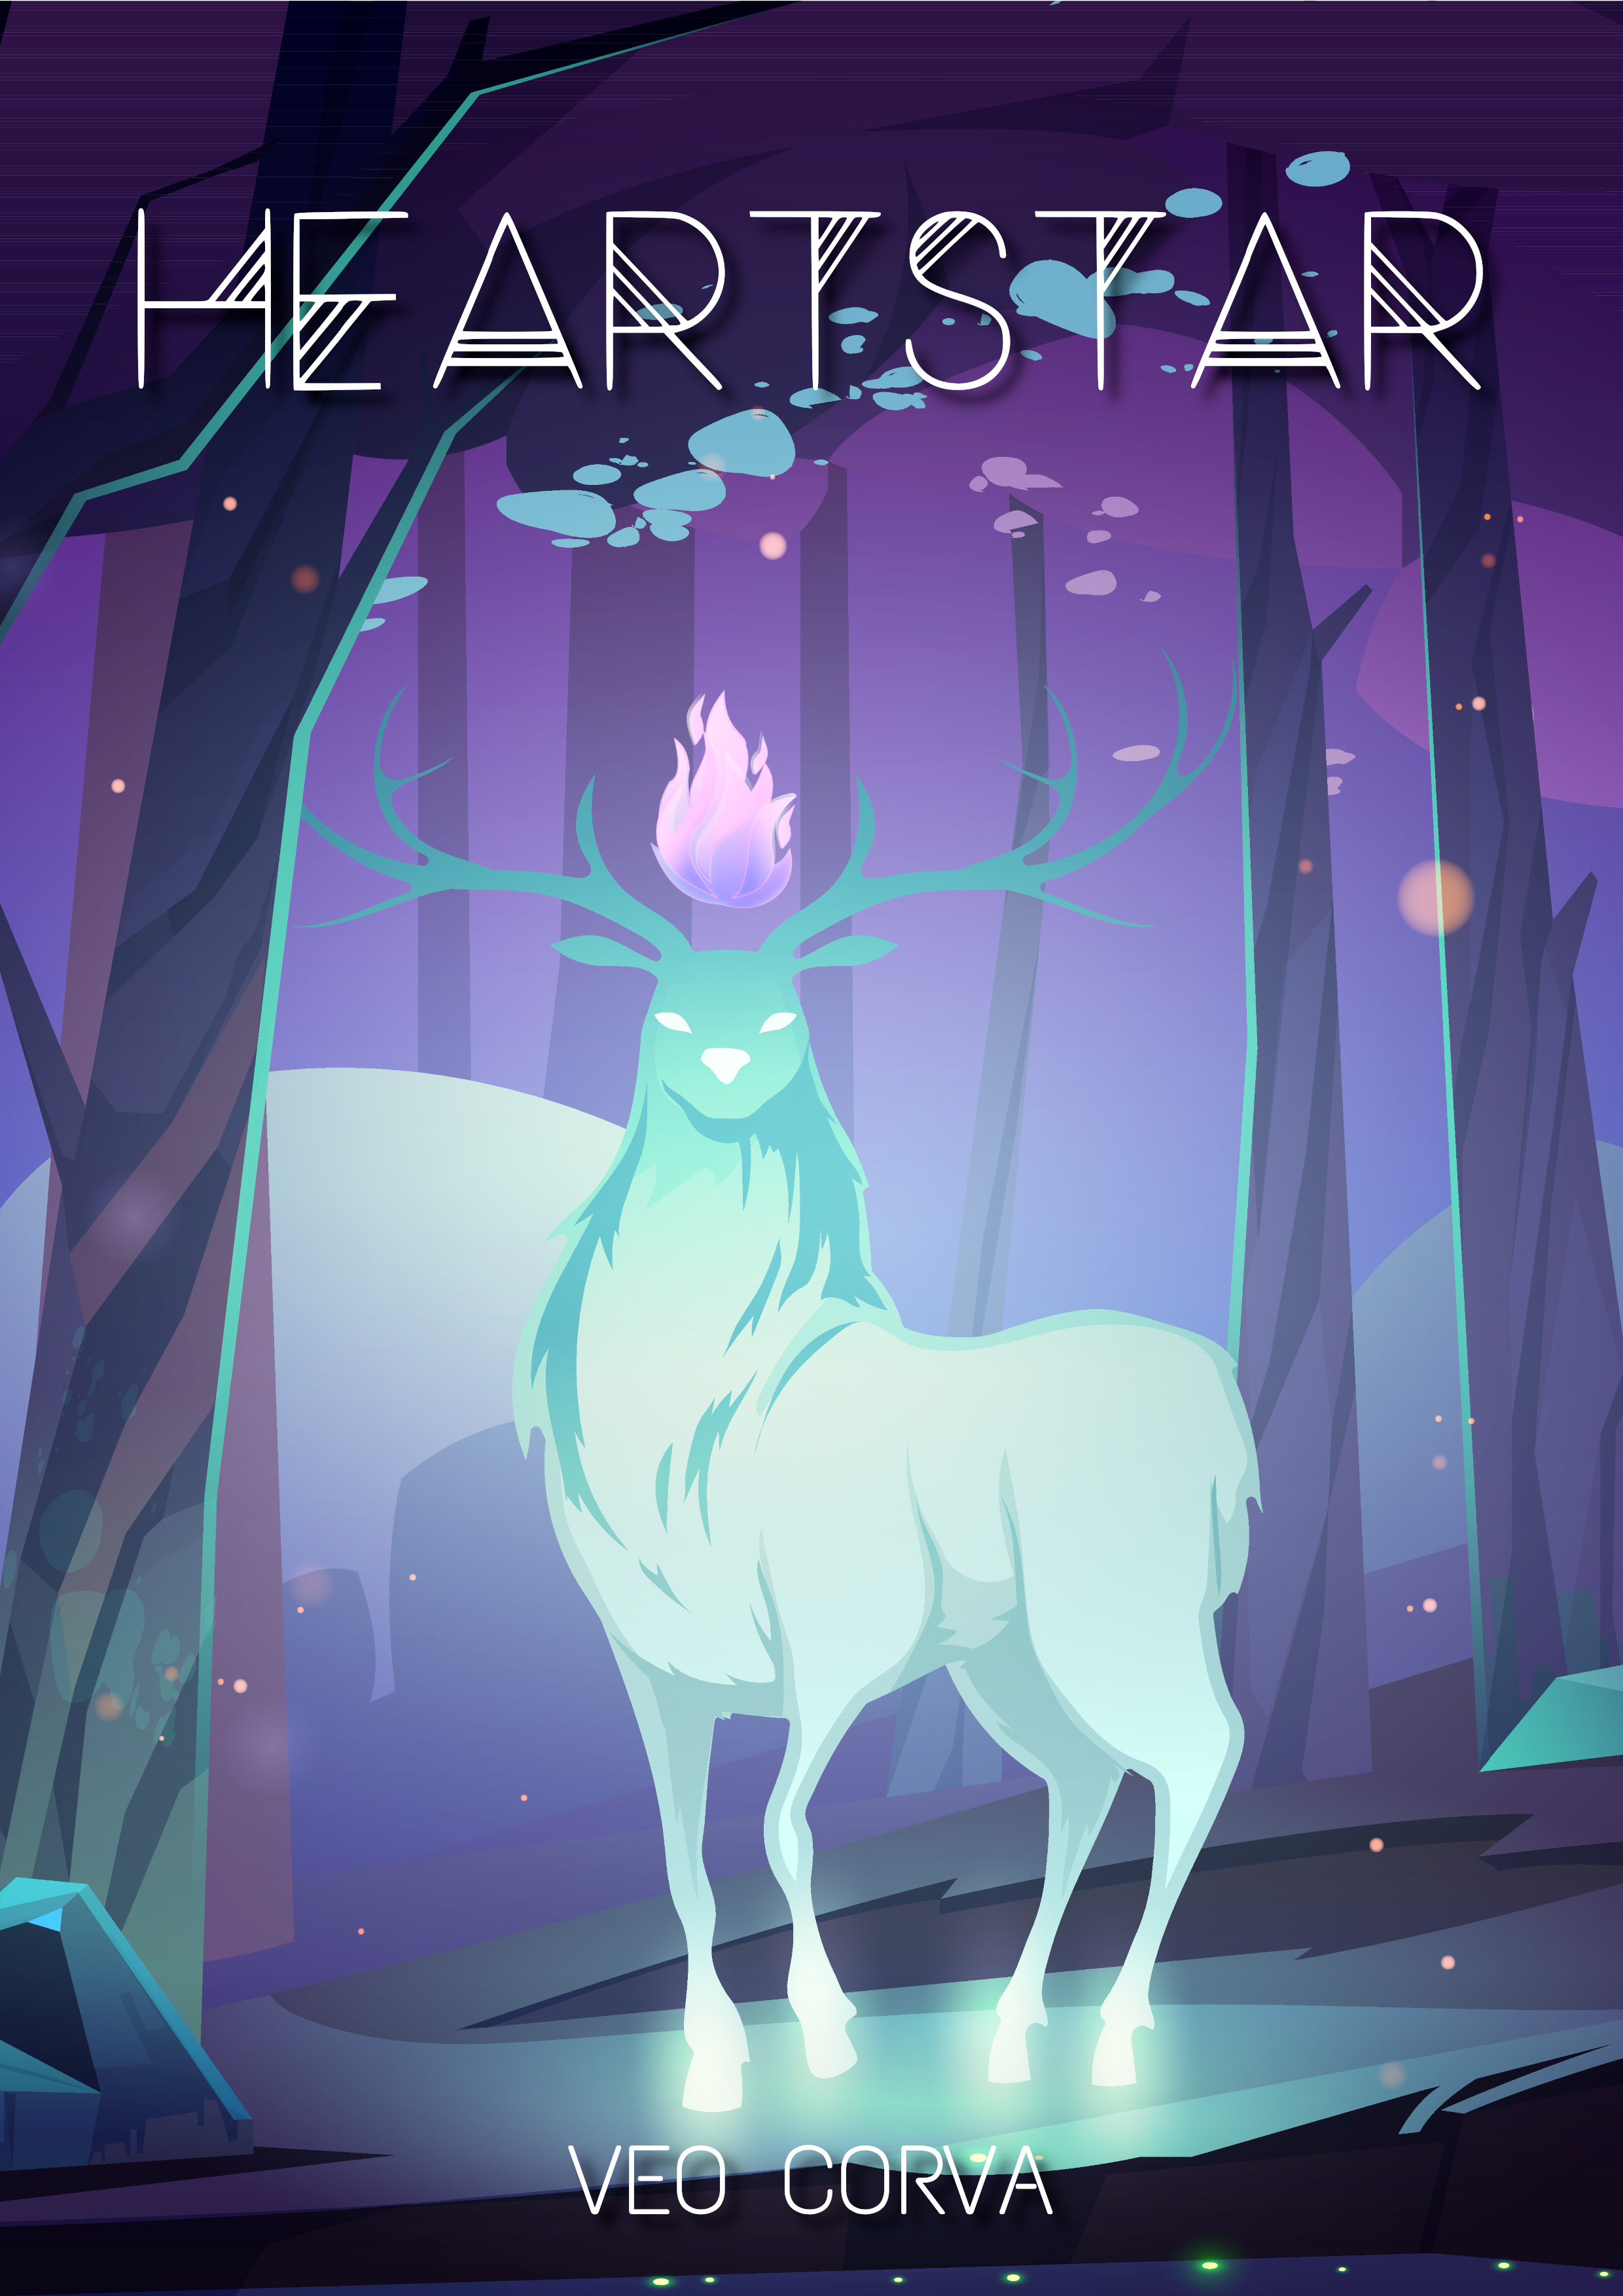 Heartstar by Veo Corva. A glowing stag with a ball of purple flame above its antlers stands in a magical, alien forest.